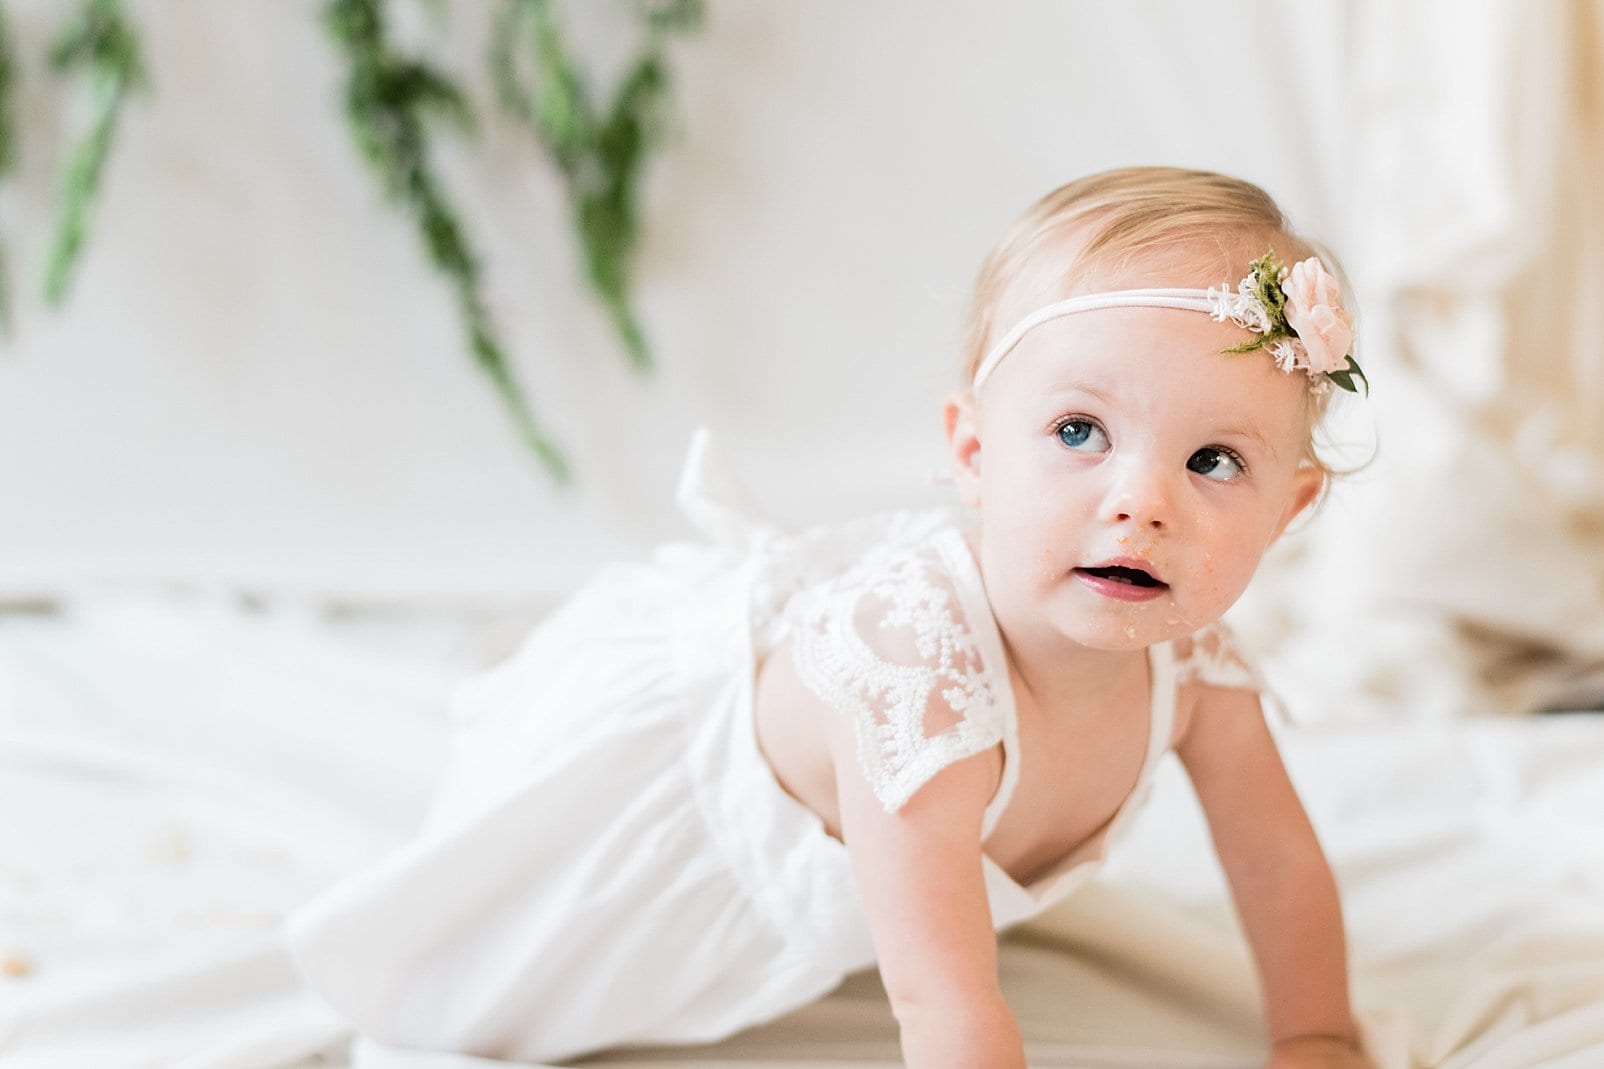 Raleigh 1 year old in an ivory dress with lace criss cross straps photo